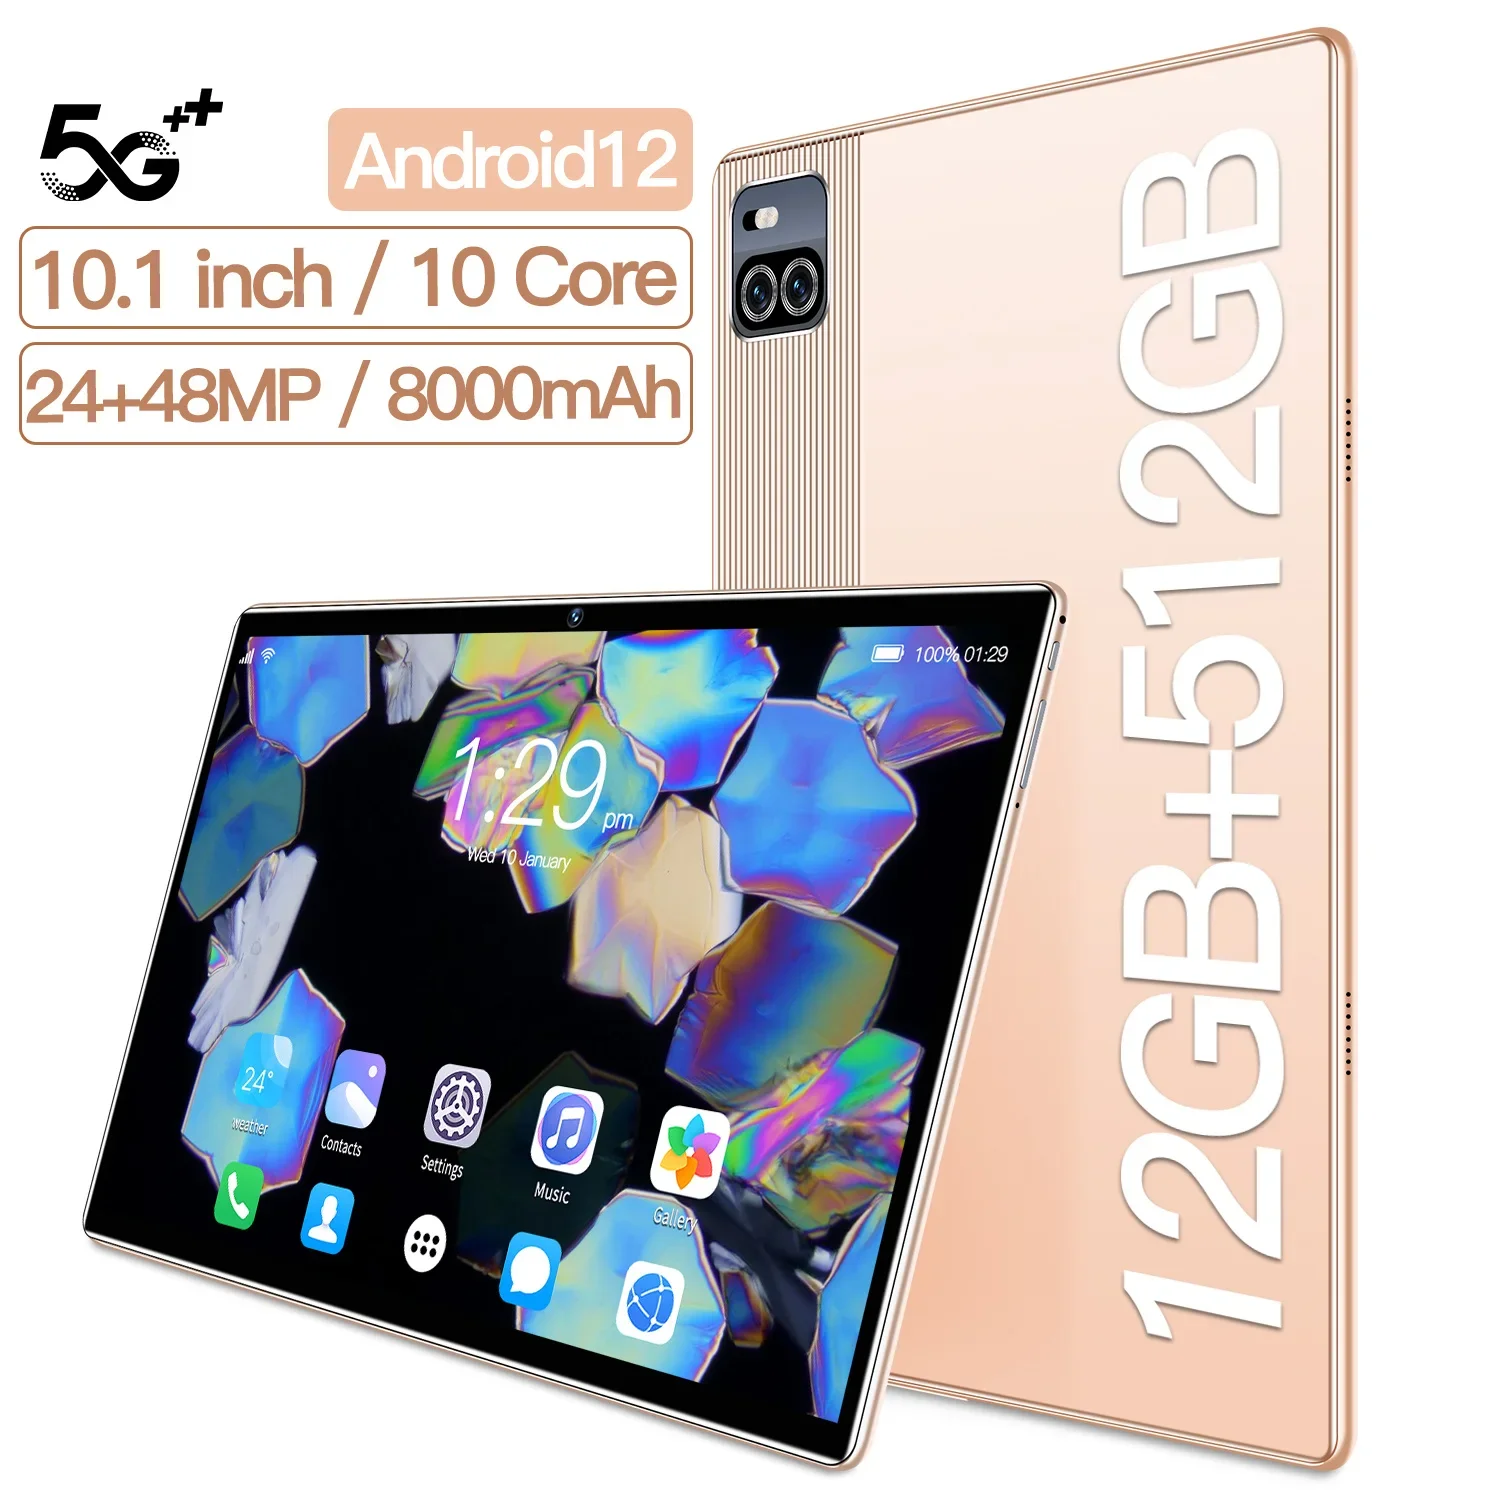 NEW Tablet Pad Pro 12GB RAM 512GB ROM 10.1 Inch HD Display Android 12 4G/5G Dual SIM Card Slot 8000mAh Battery Original Tablets cheapest 5g smartphone i13 pro max 12gb ram 512gb rom 5 5 inch hd screen dual sim unlocked smart phone android latest 5g phone